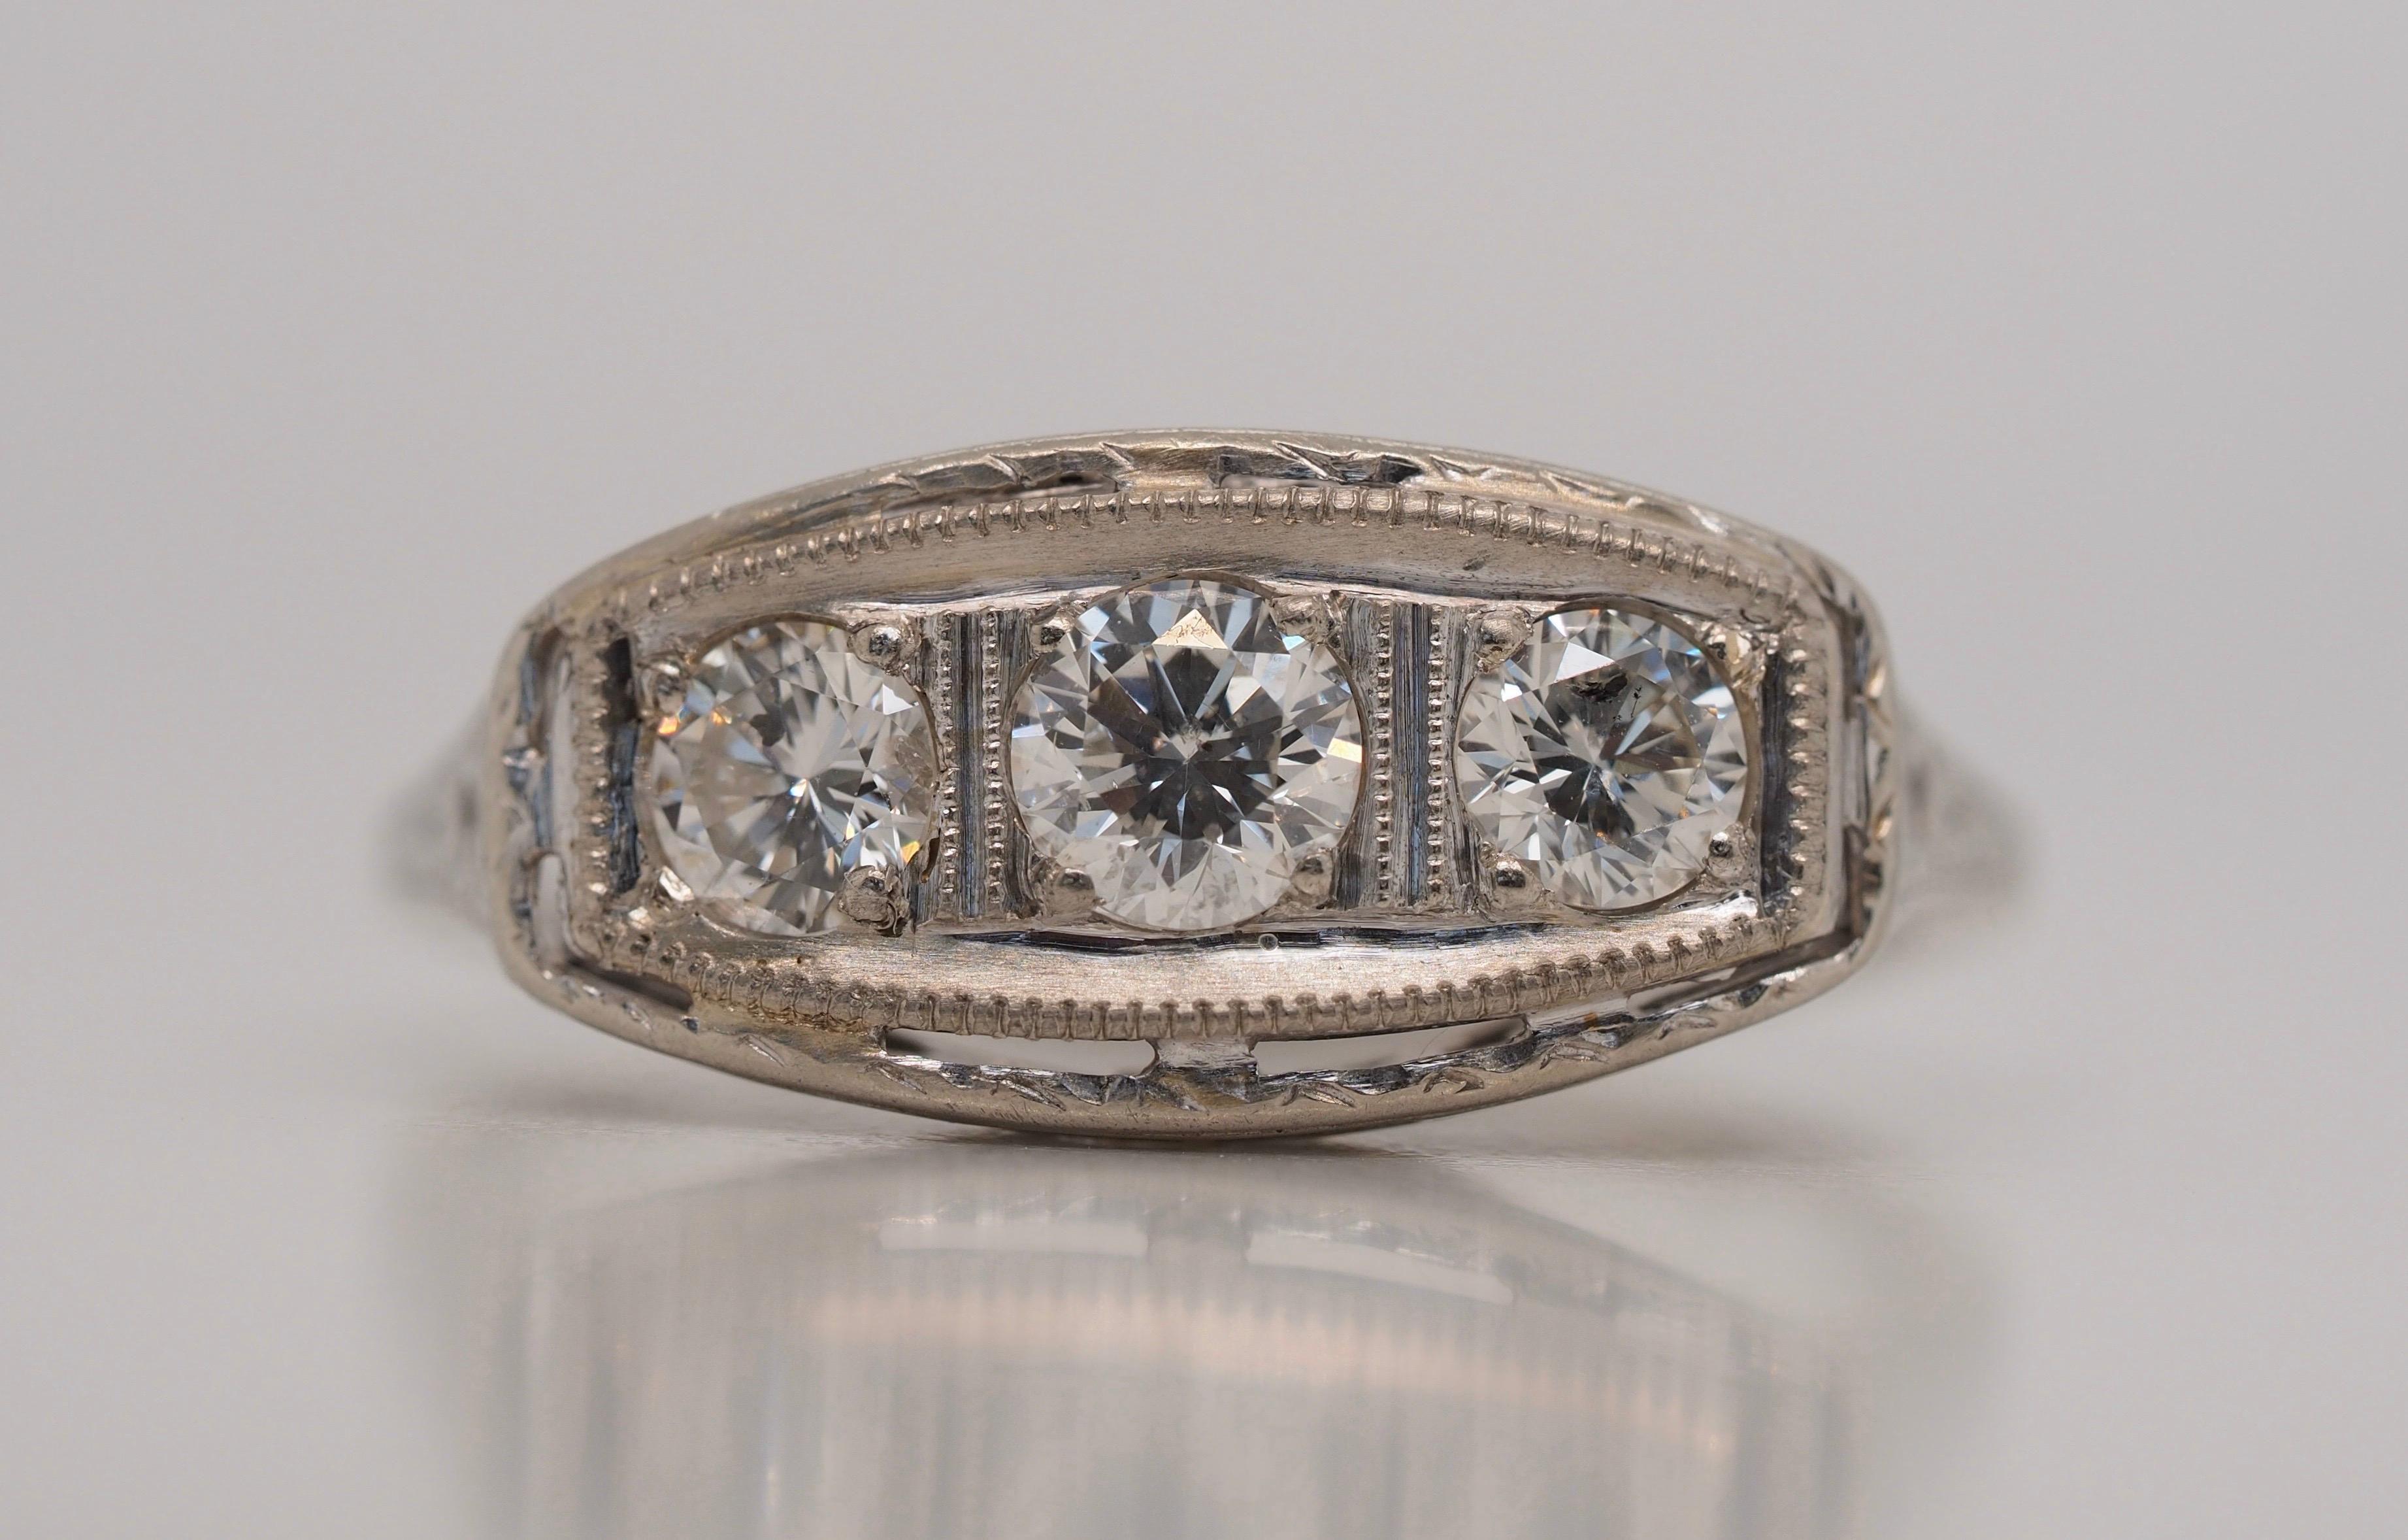 Art Deco Three-Stone Diamond Engagement Ring in 18 Karat Gold dates back to the 1920's with its incredible and notable design. Round brilliant cut diamonds were born in 1919 and is what is set in this marvelous ring. The center diamond weight is